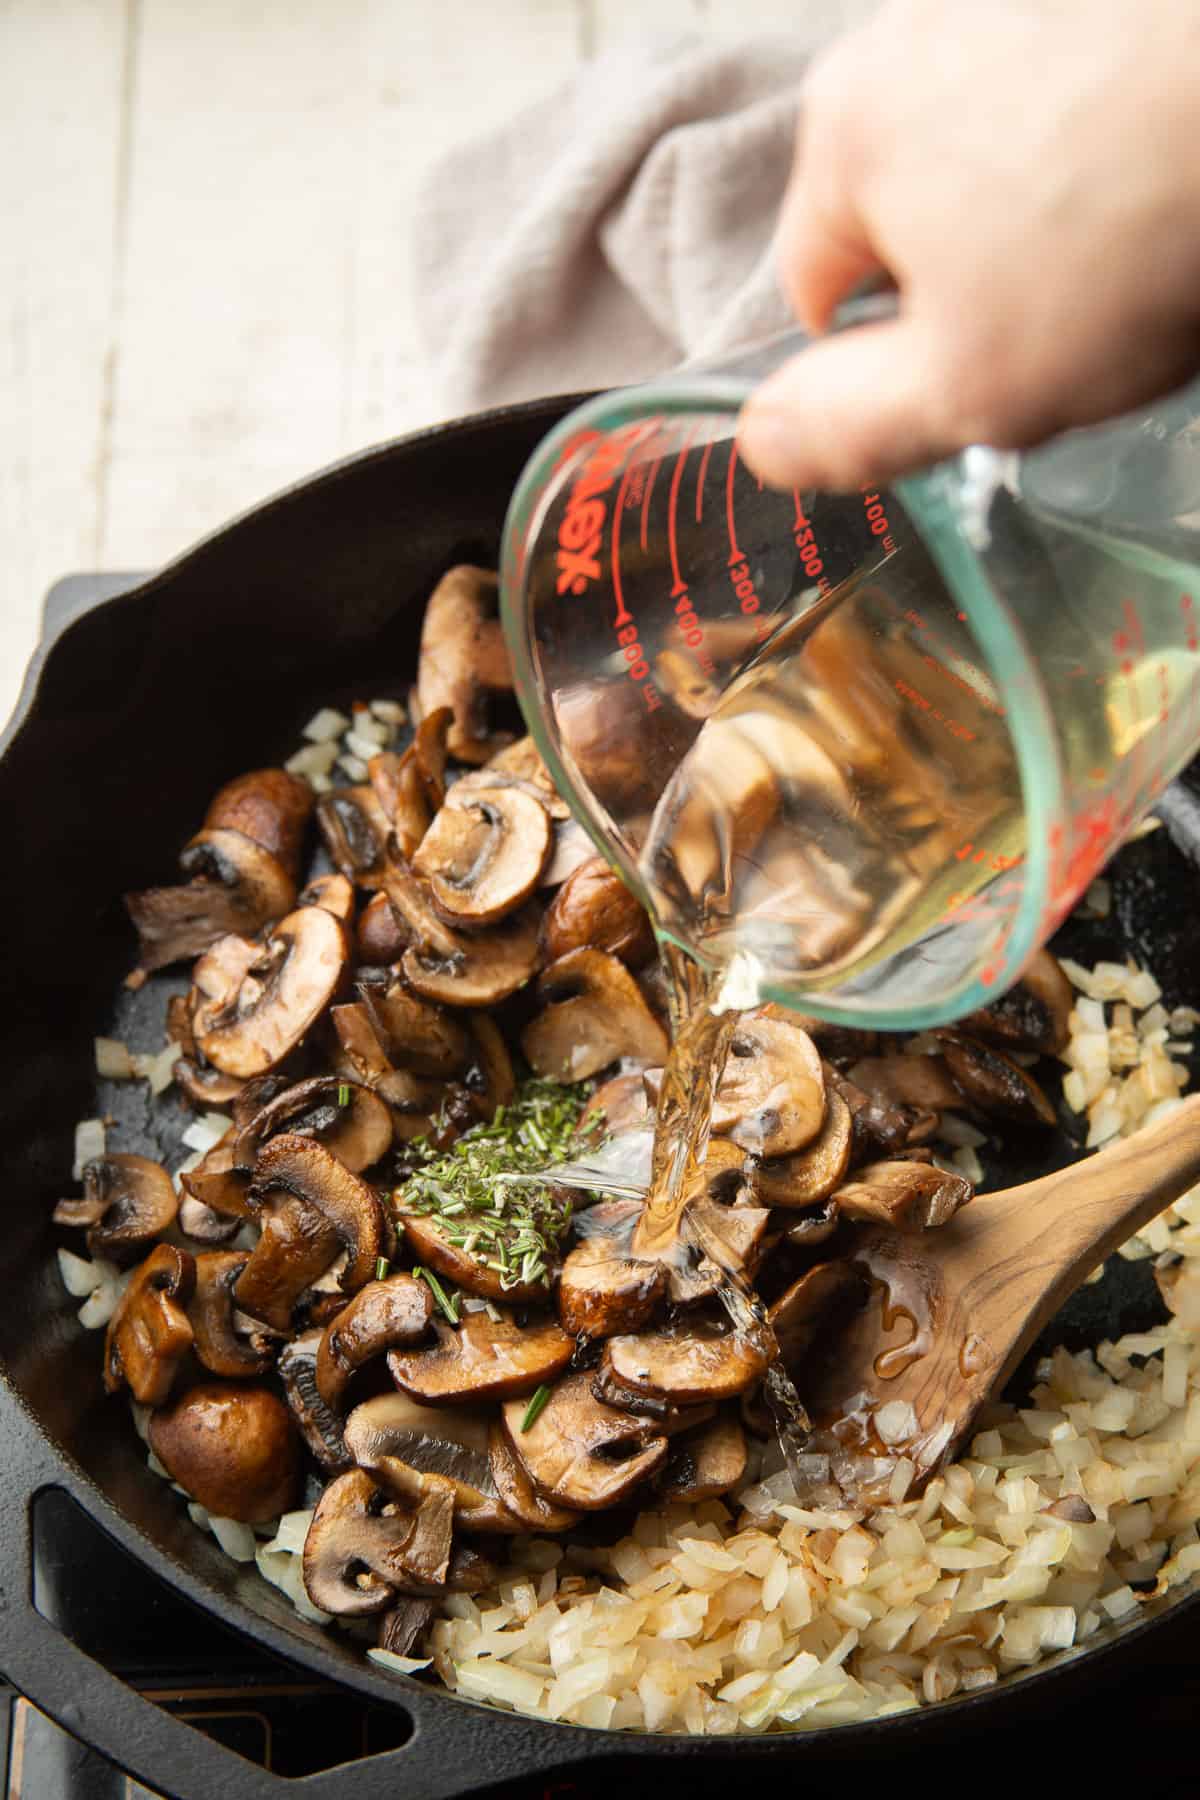 Hand pouring dry sherry into a skillet of mushrooms, onions and rosemary.